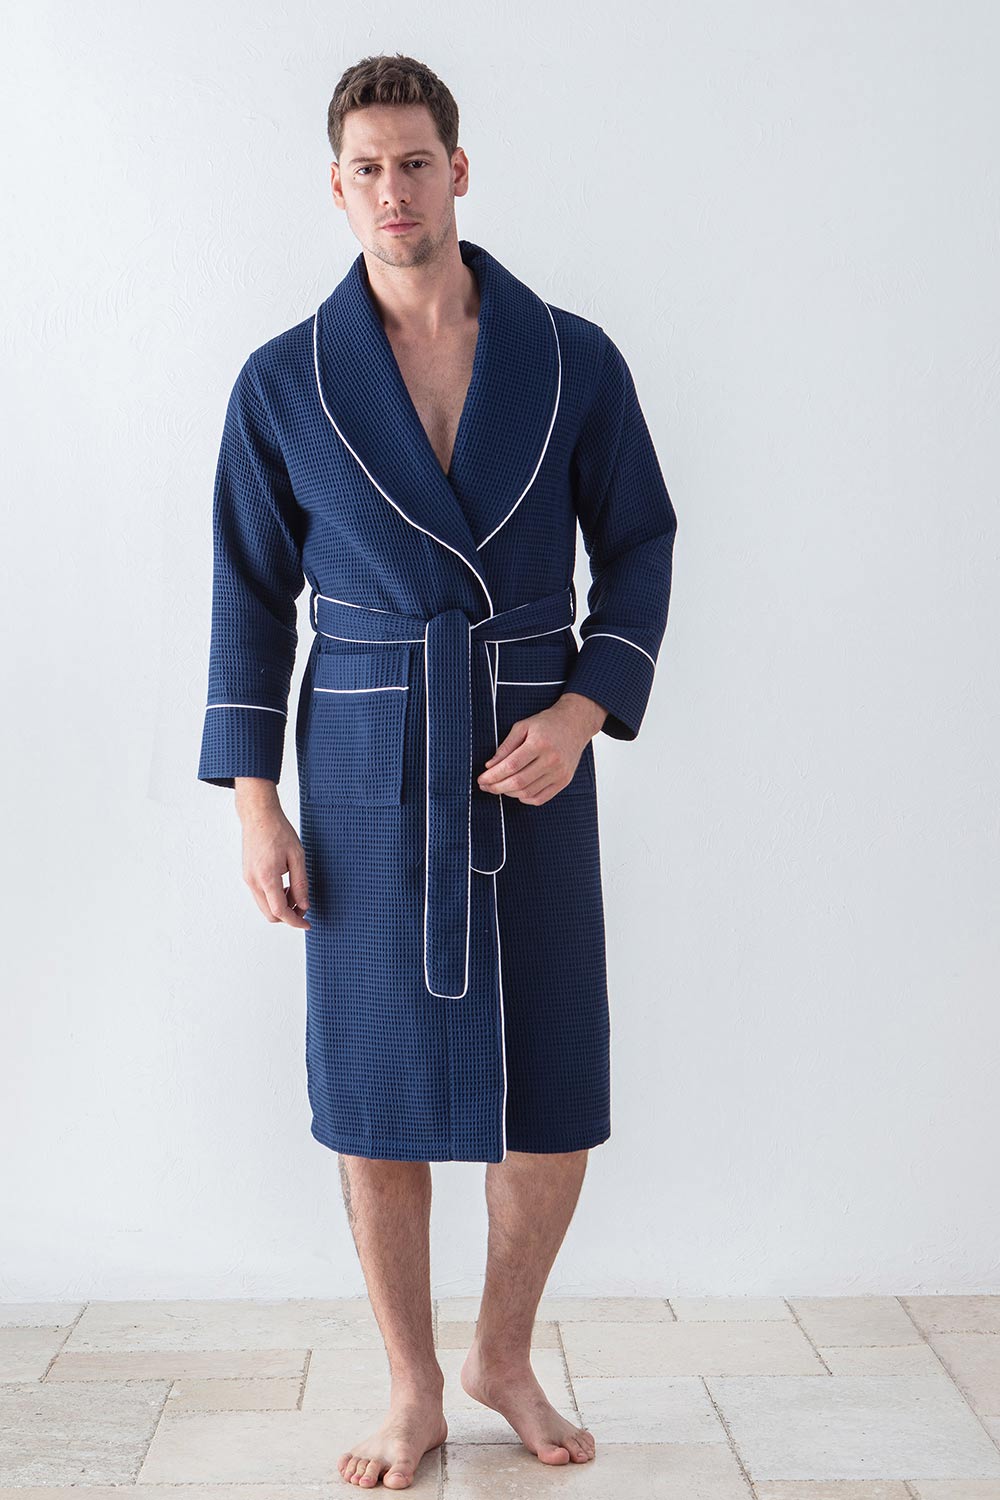 Men's Bathrobe, US Shipping only, gifts for him